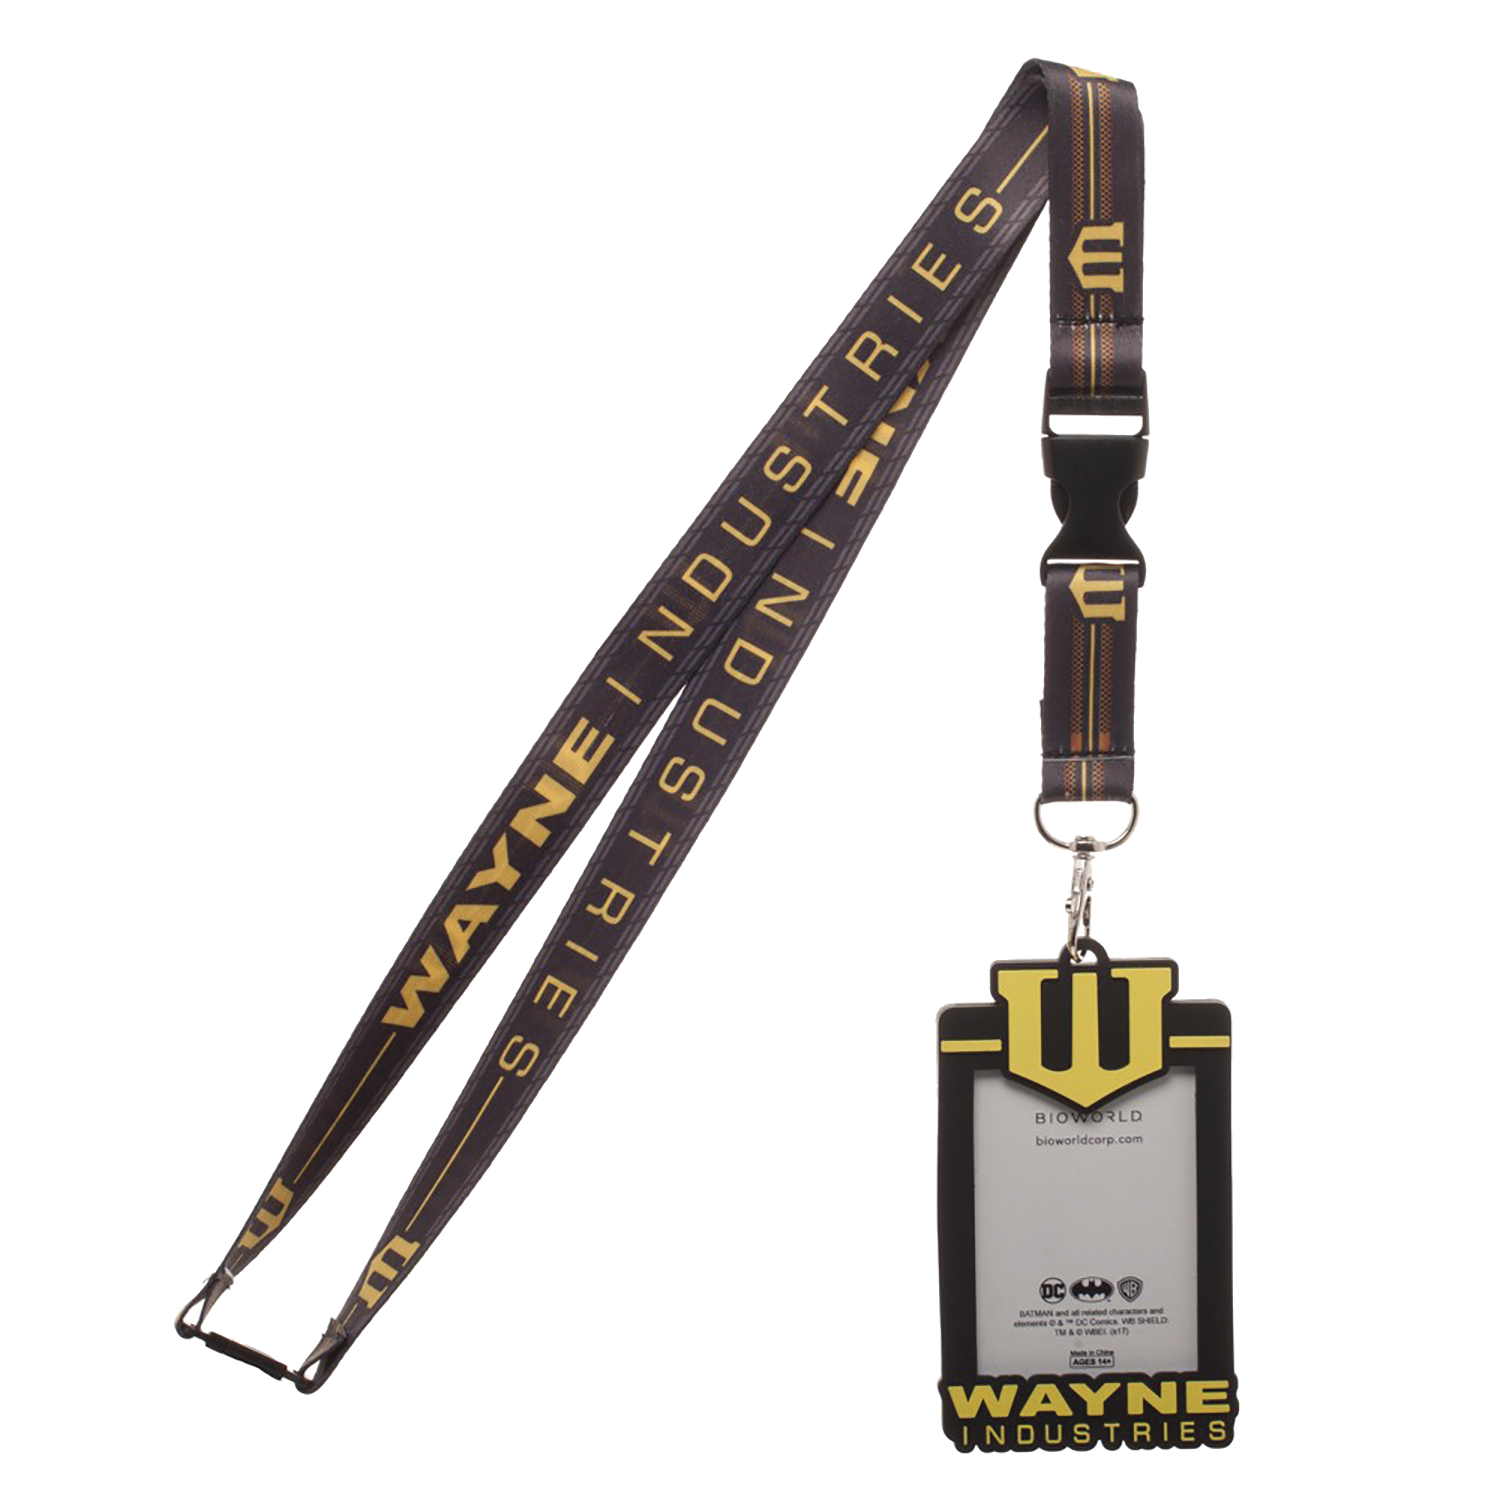 APR188352 - WAYNE INDUSTRIES LANYARD WITH RUBBER ID HOLDER